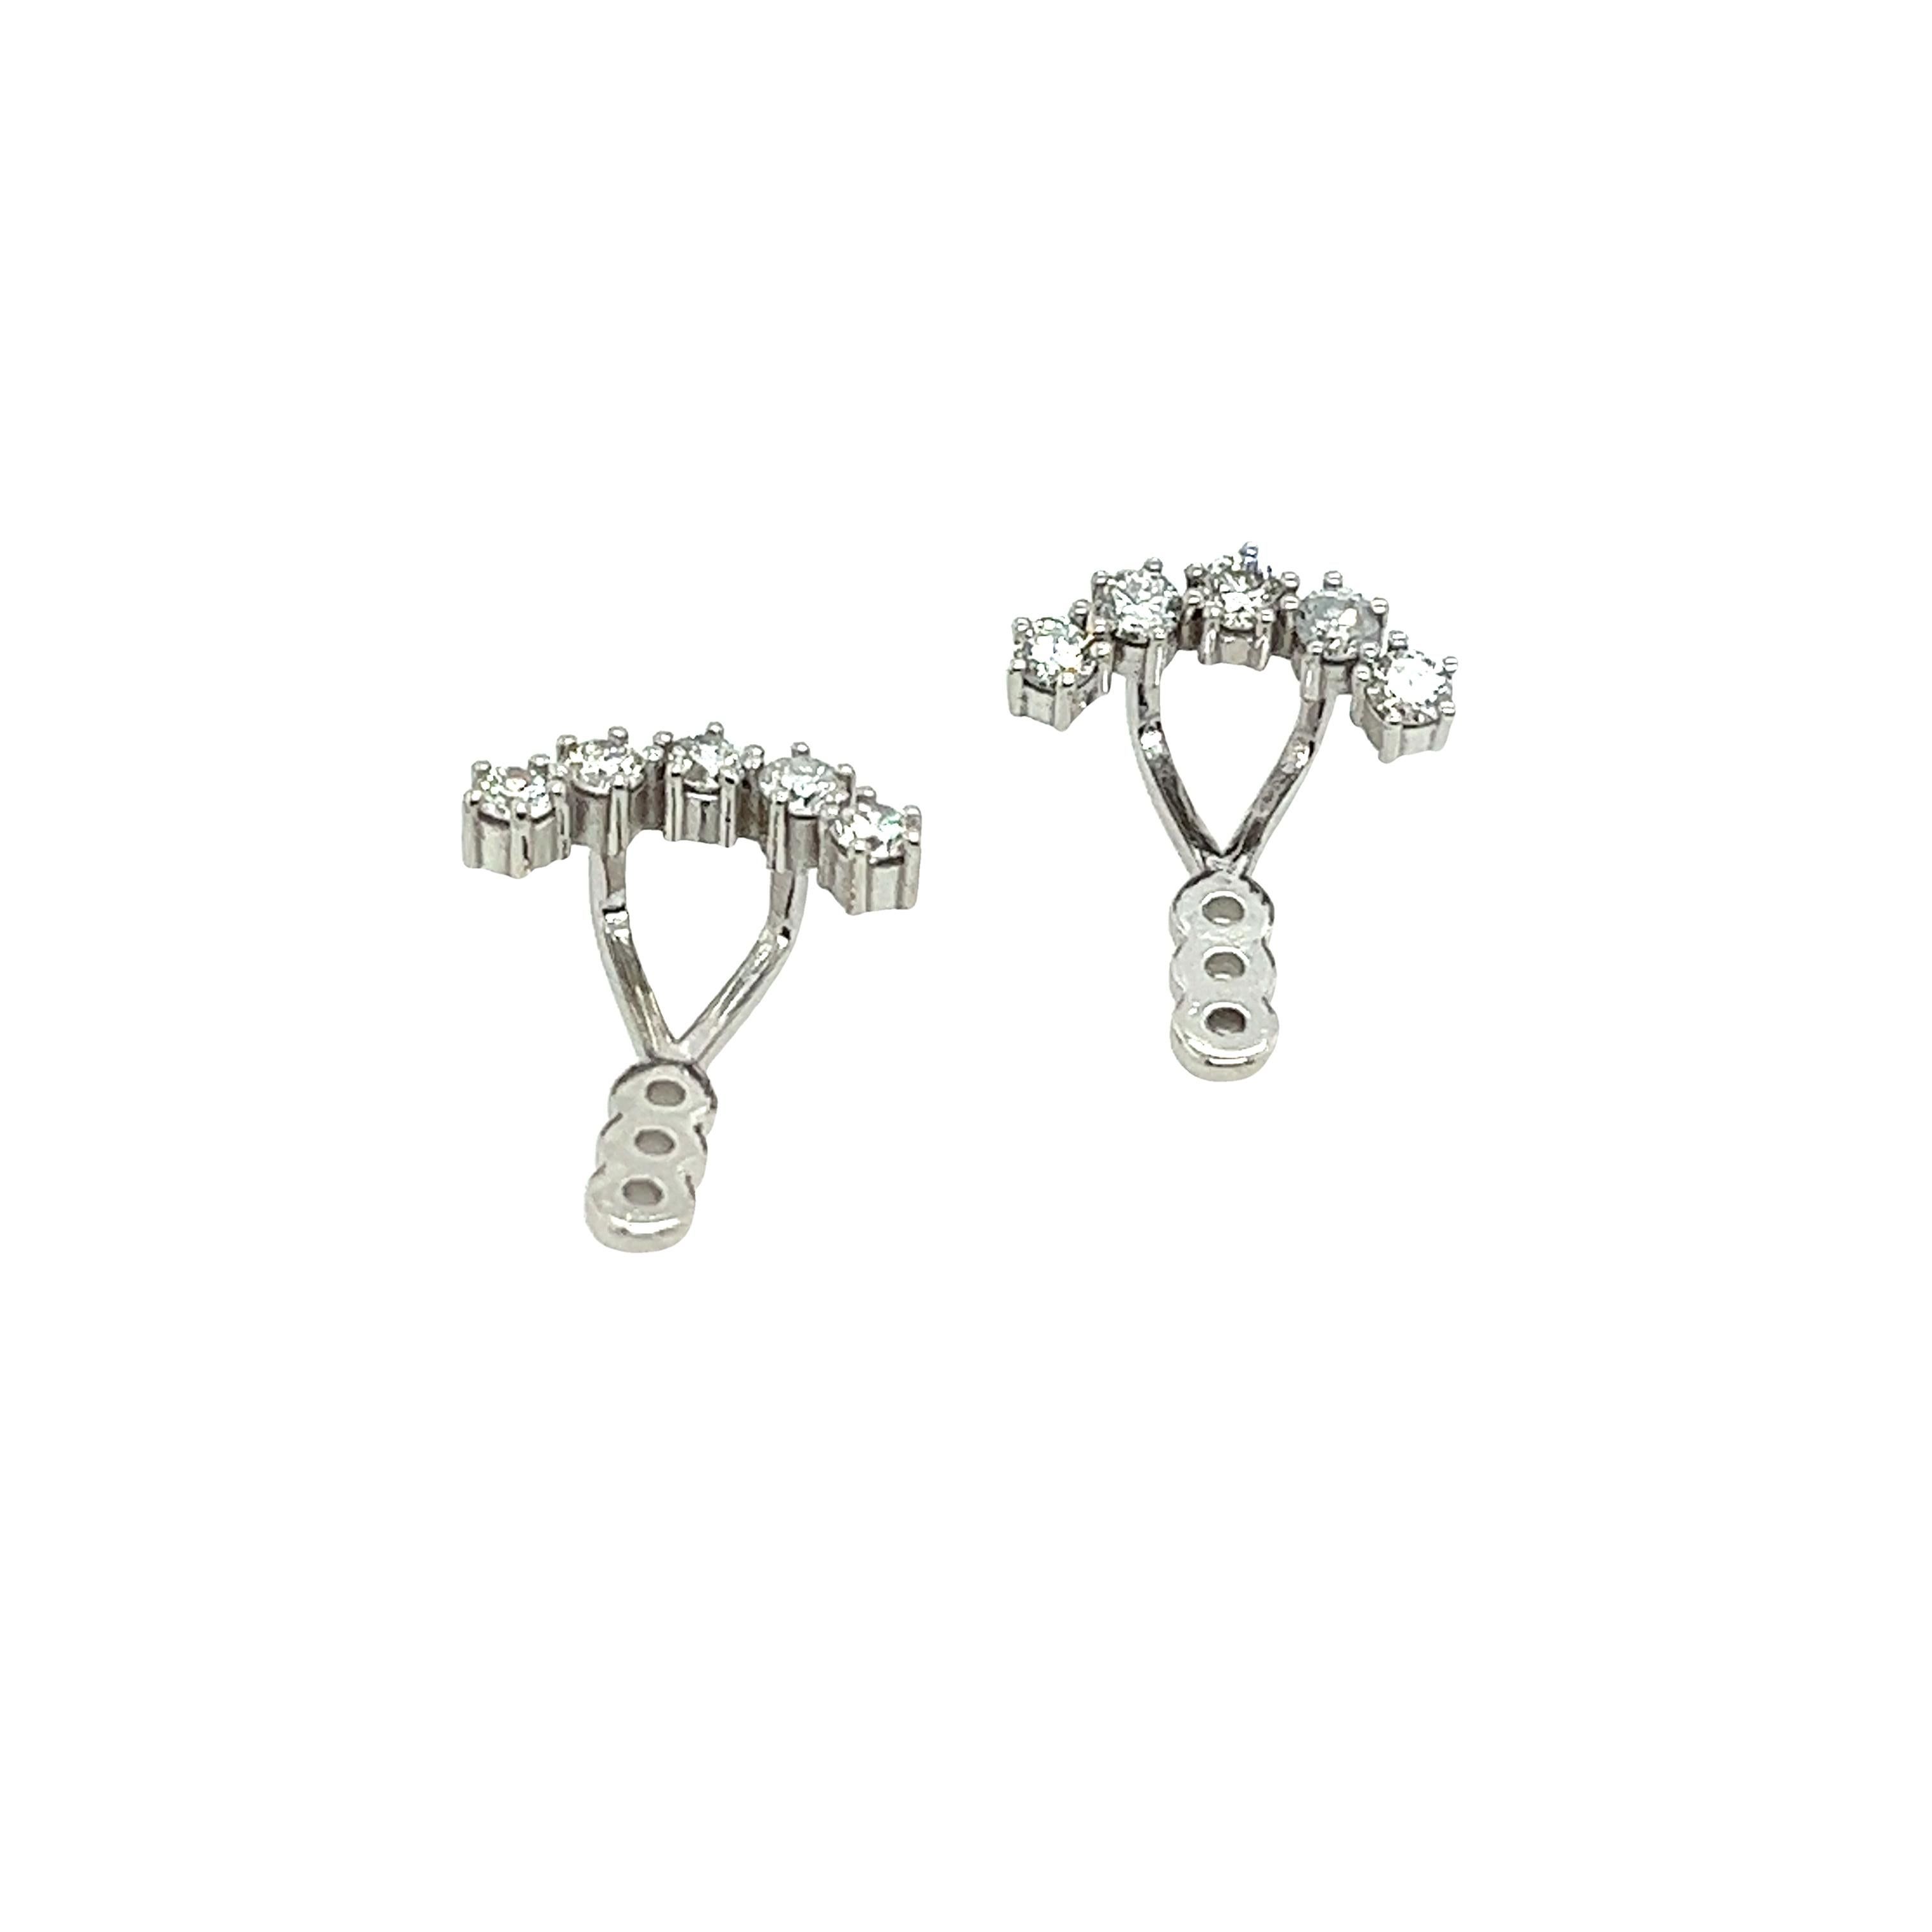 Round Cut 14ct White Gold Earring Jackets fit Behind any Stud Earring, set with 0.40ct of  For Sale